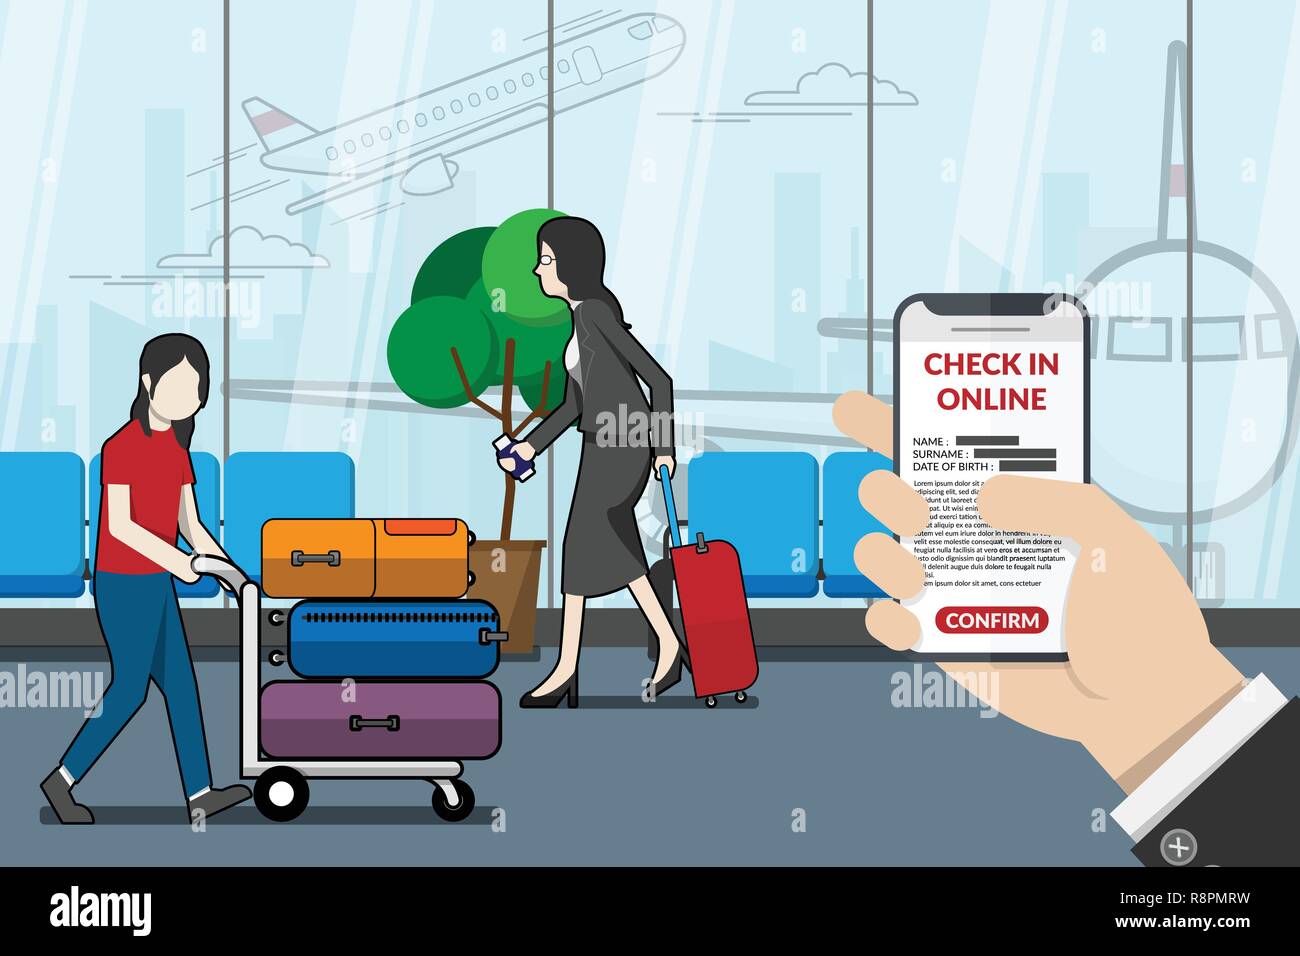 businessman as passenger using application for check in online at the airport. technology for travel concept. vector illustrator flat design Stock Vector